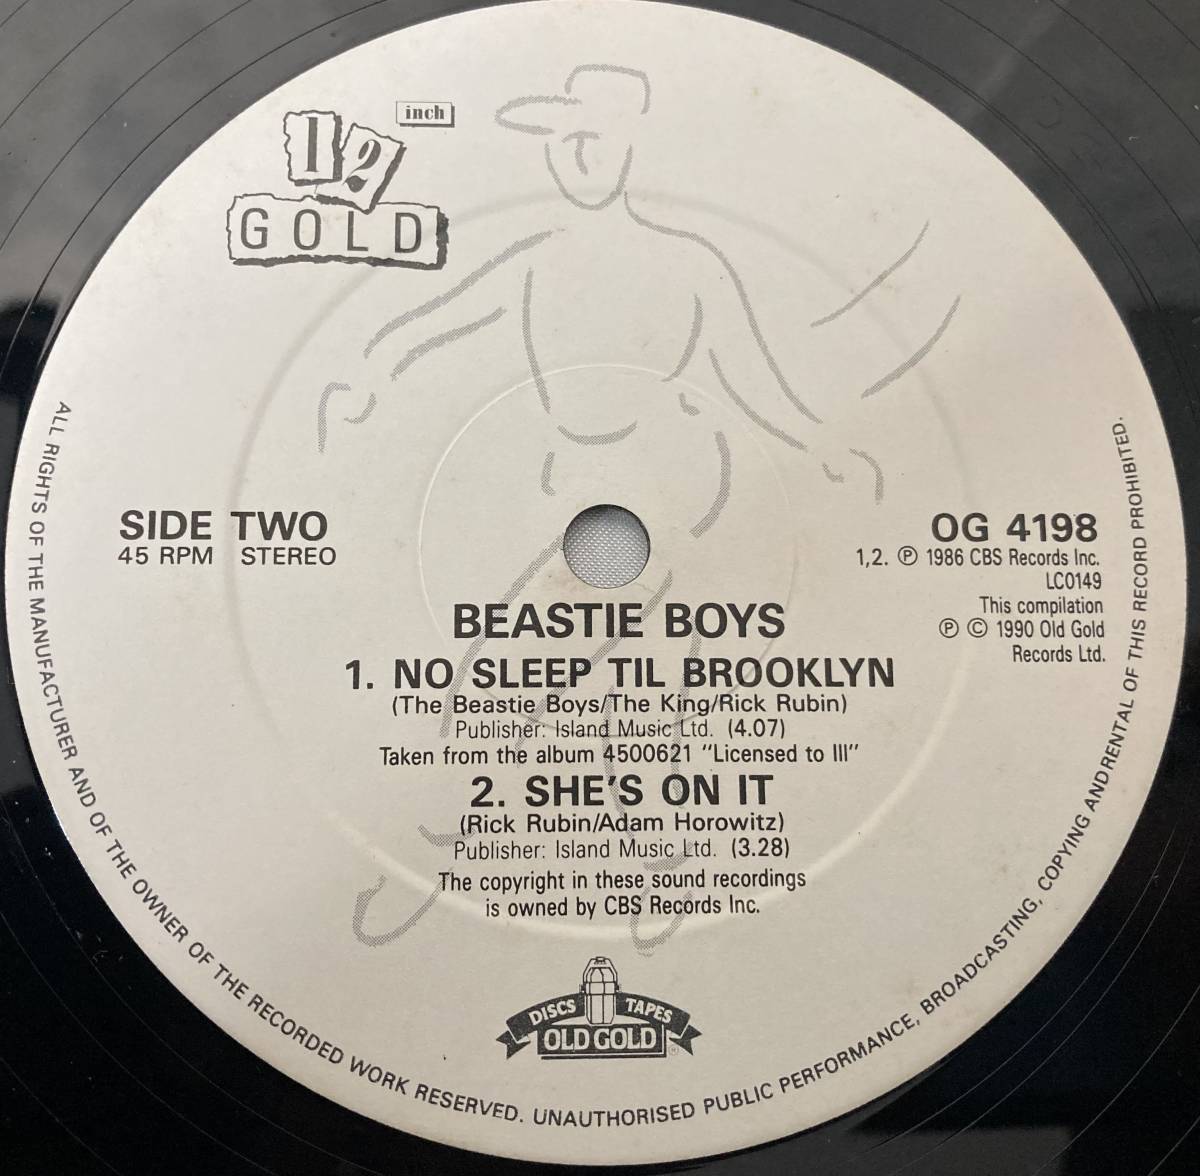 Beastie Boys - (You've Got To) Fight For Your Right To Party【UK盤/試聴検品済】90'/Hip Hop/Hard core Rap/Pop Rap 12inch シングル_画像5